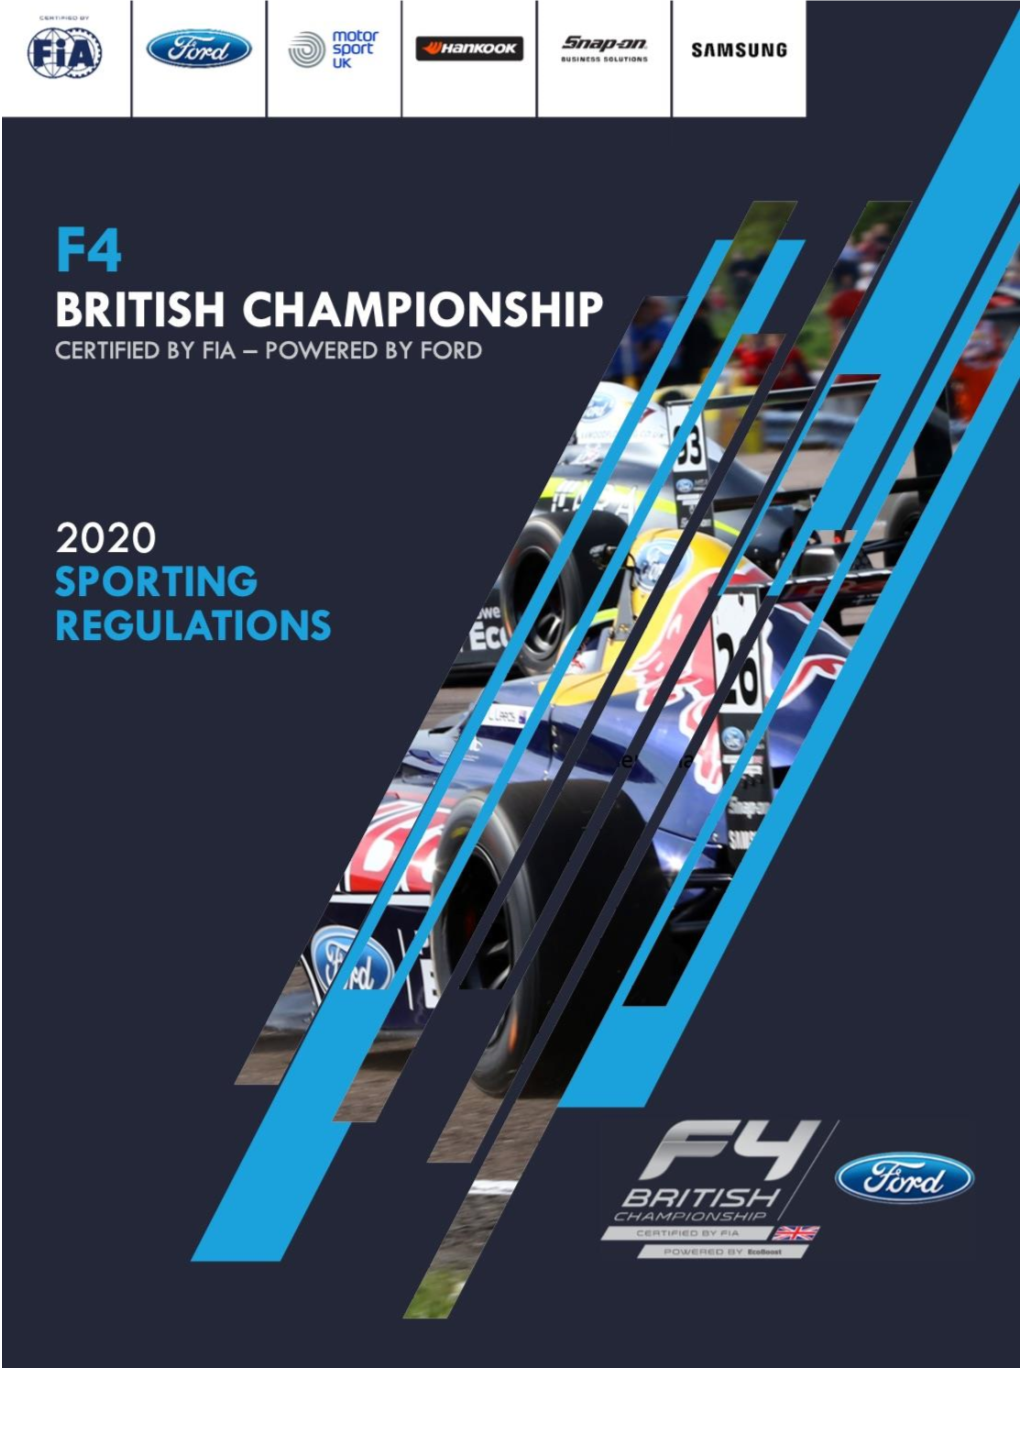 2020 F4 British Championship - Certified by Fia, Powered by Ecoboost